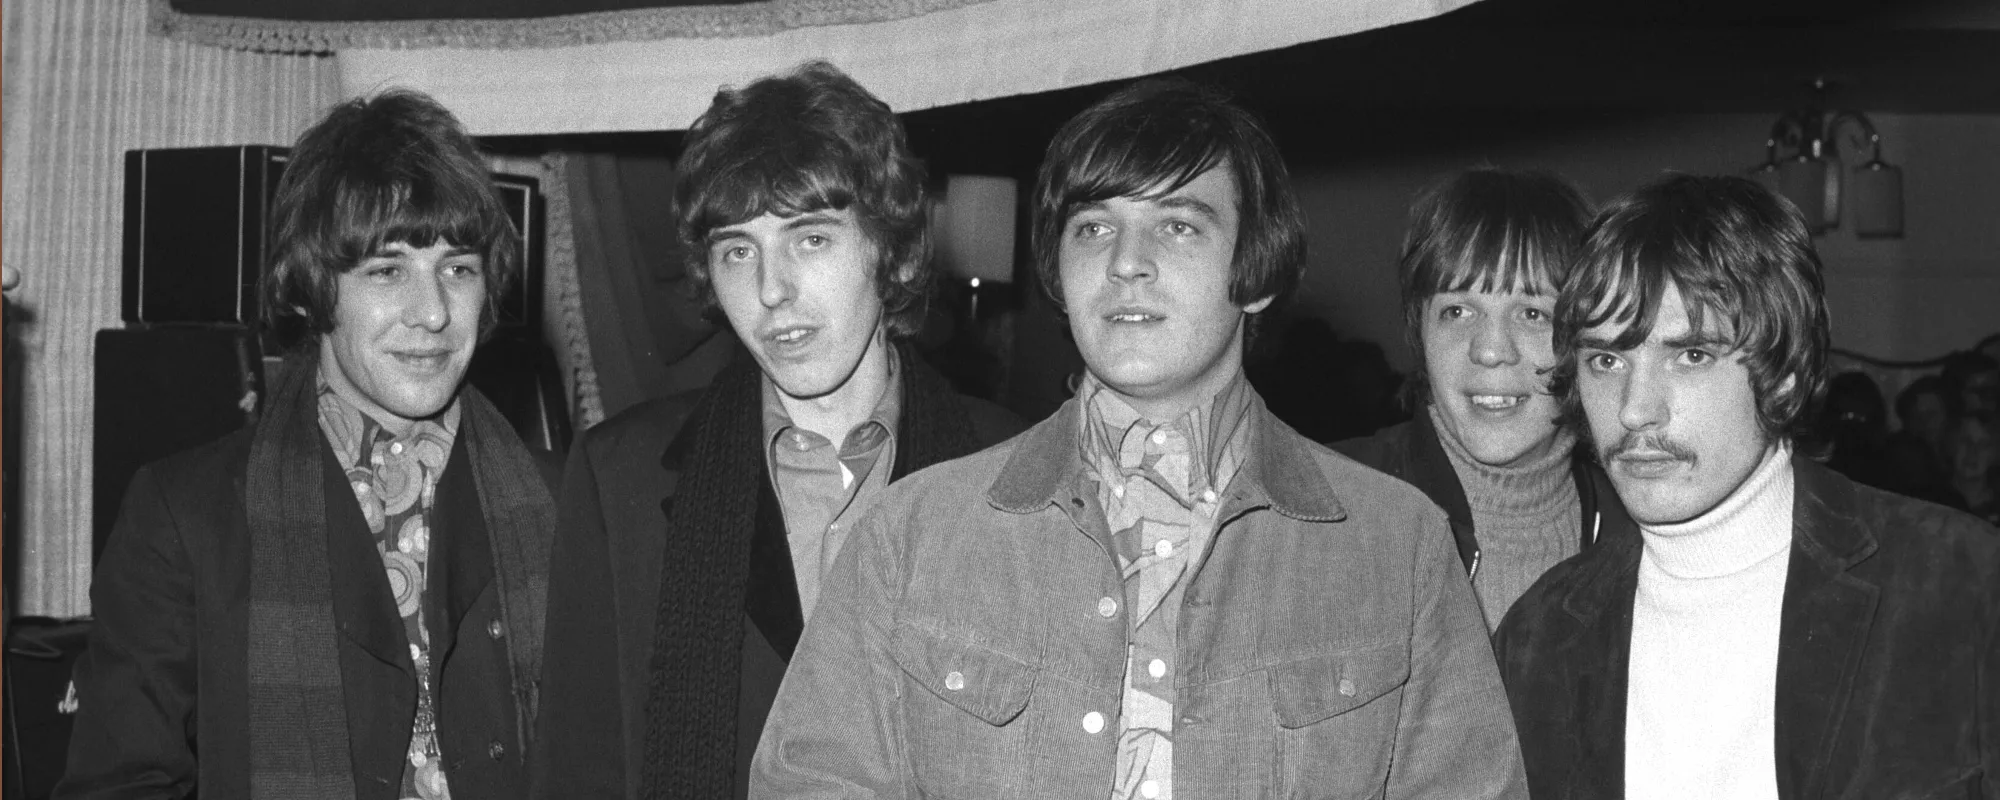 Procol Harum’s”A Whiter Shade of Pale’ Co-Writer Keith Reid Dies at 76